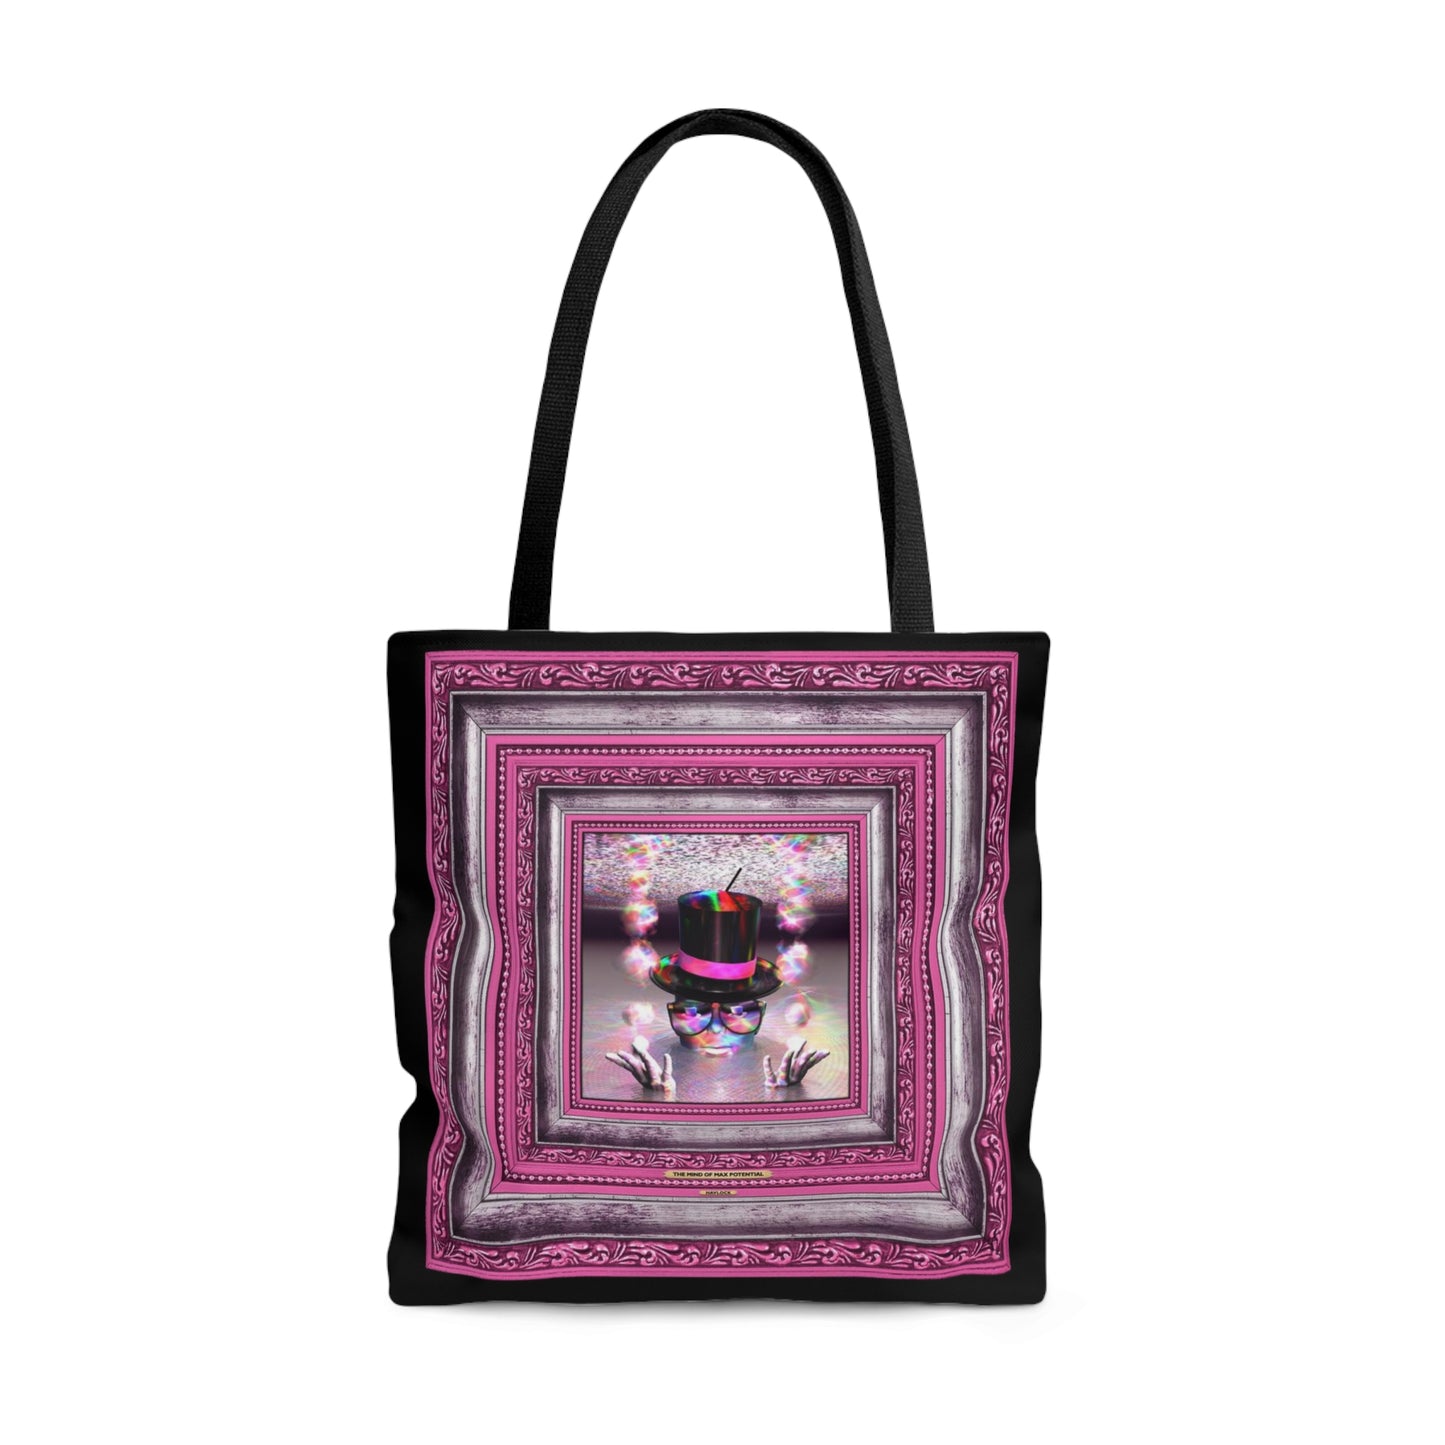 The Mind of Max Potential - Large 18" Tote Bag